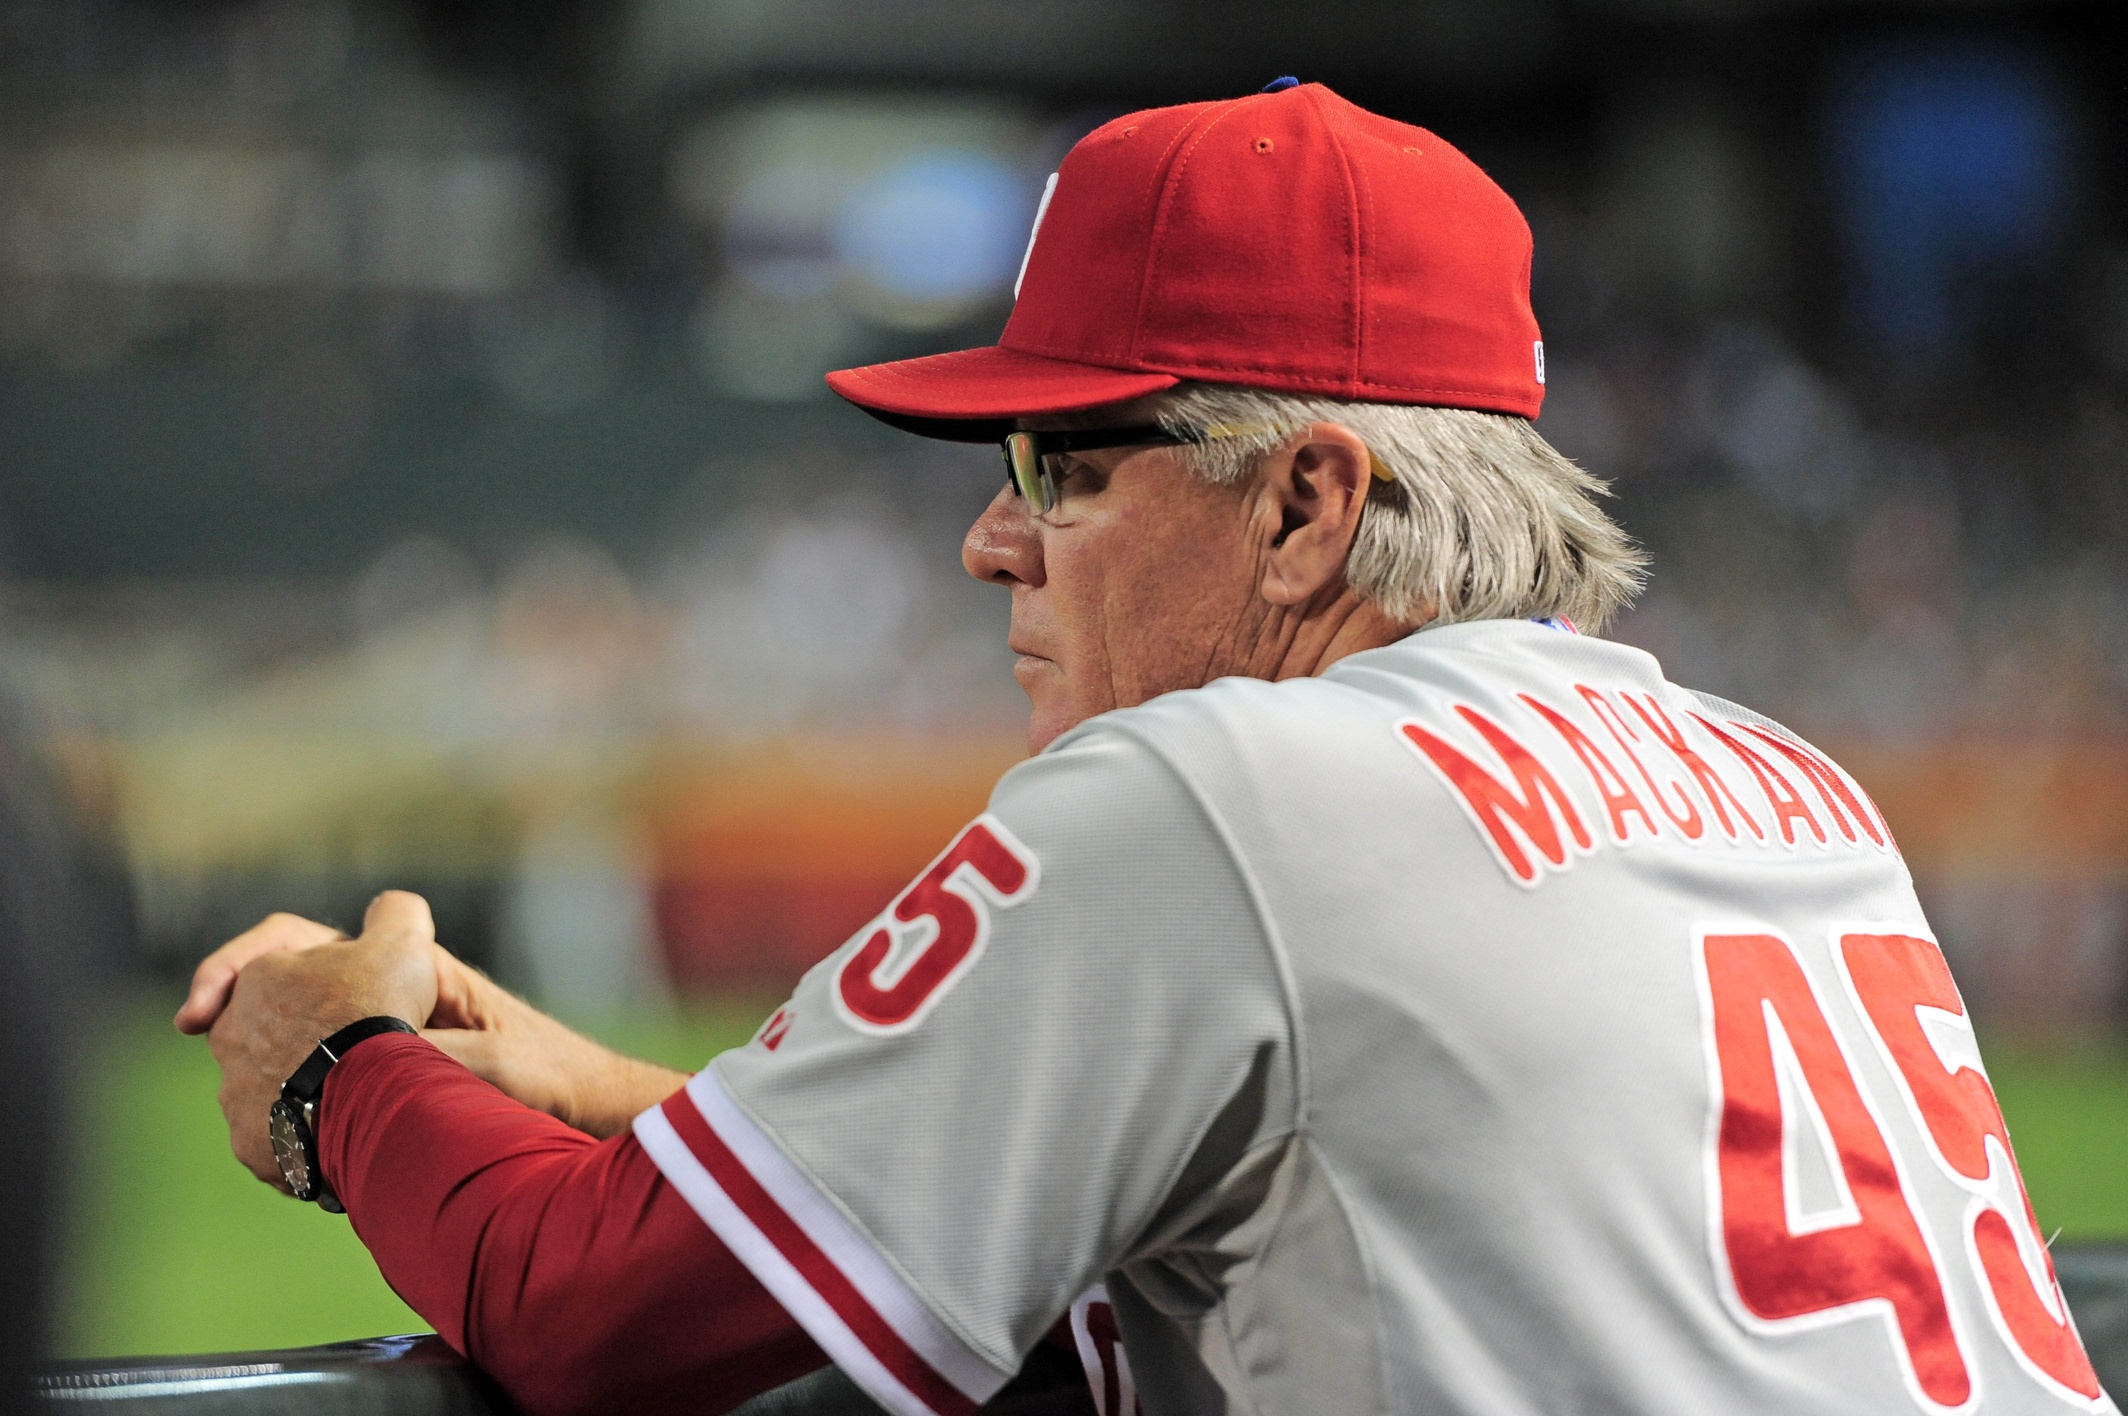 Pete Mackanin Will be the Phillies’ Manager Next Year